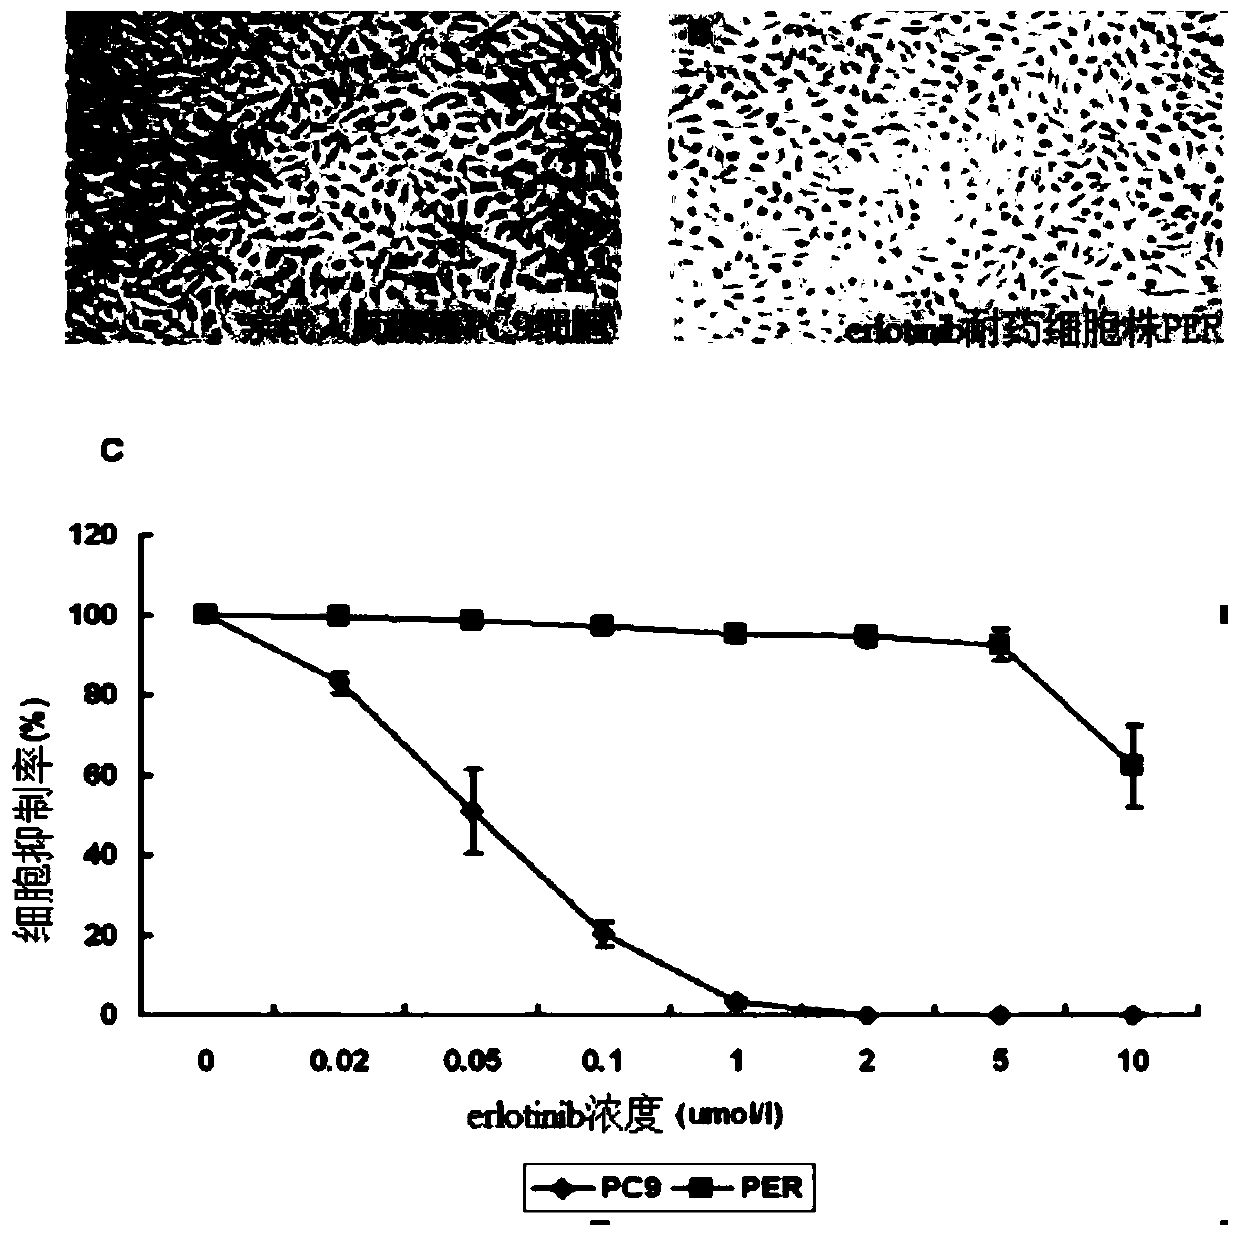 Method and application of autophagy inhibitor for overcoming drug resistance in treatment of lung cancer